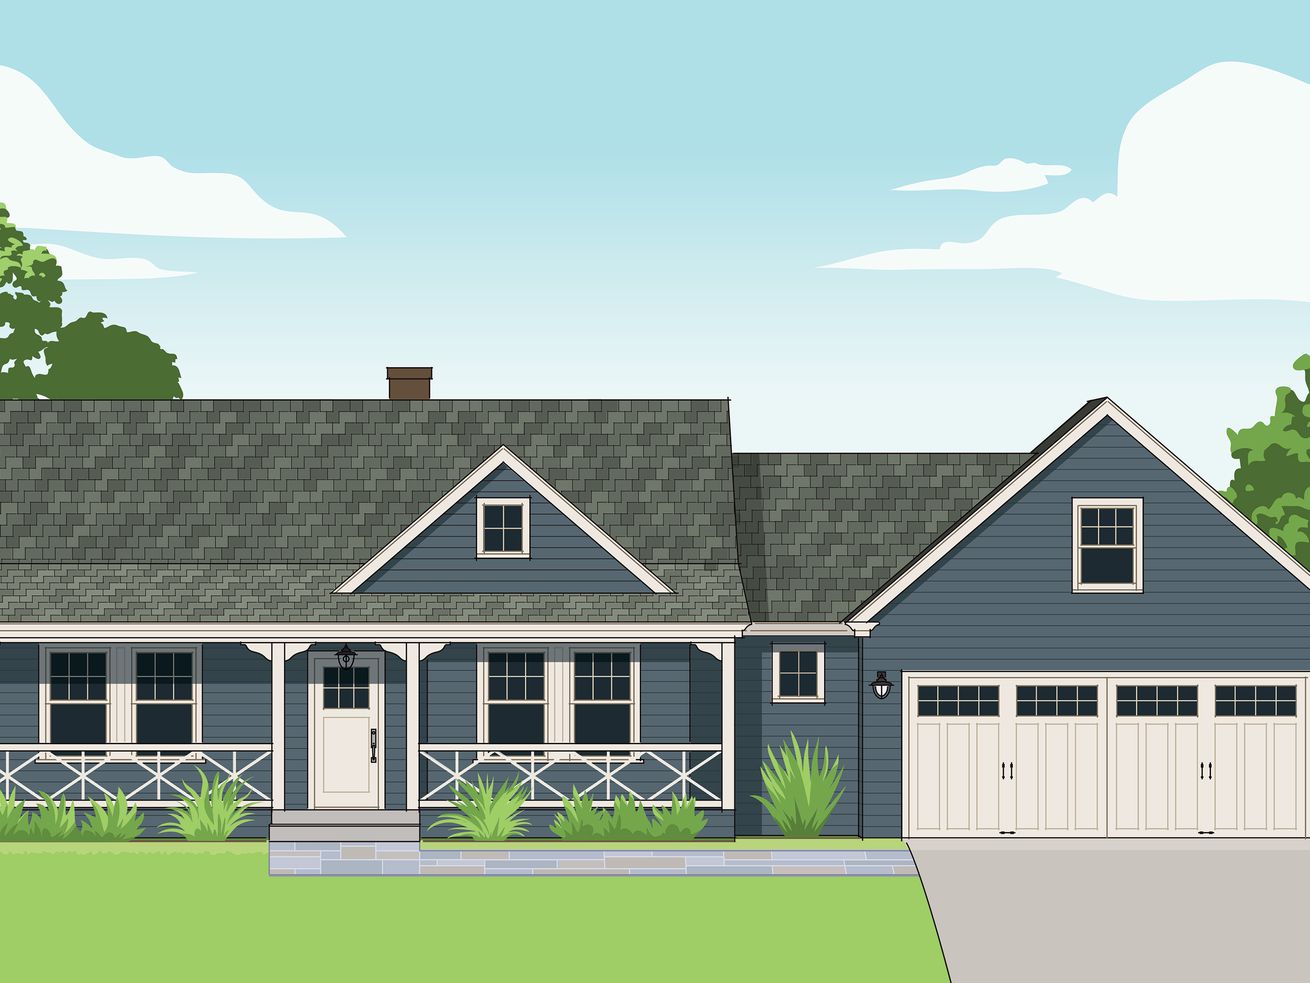 Fall 2021 Curb Appeal, 1950s Cape remodel illustration